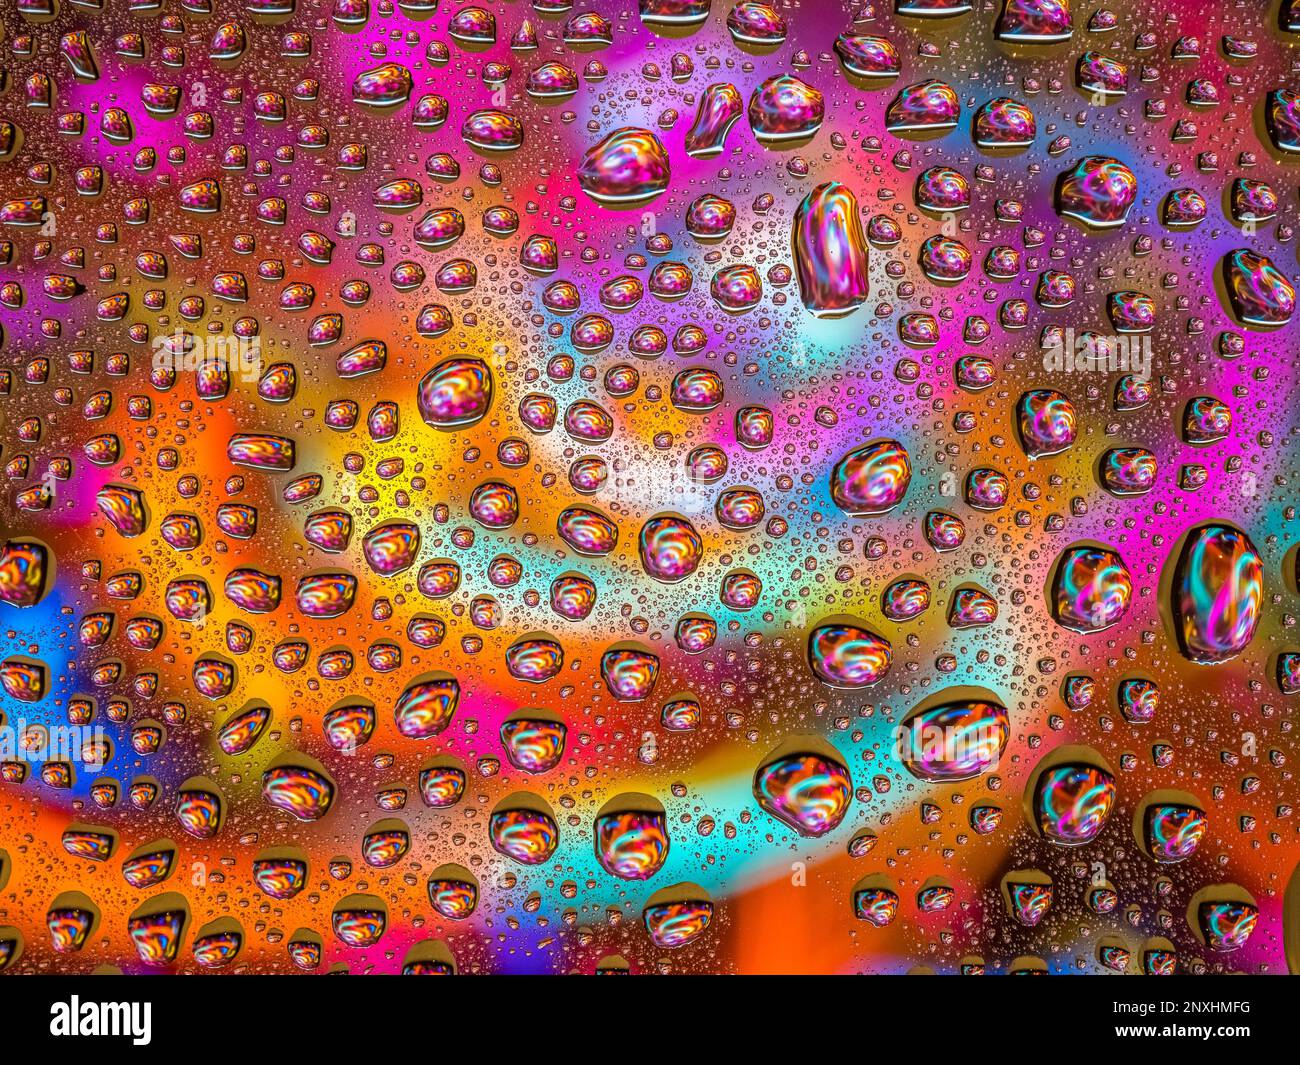 Water drops over a colorful abstract background Stock Photo